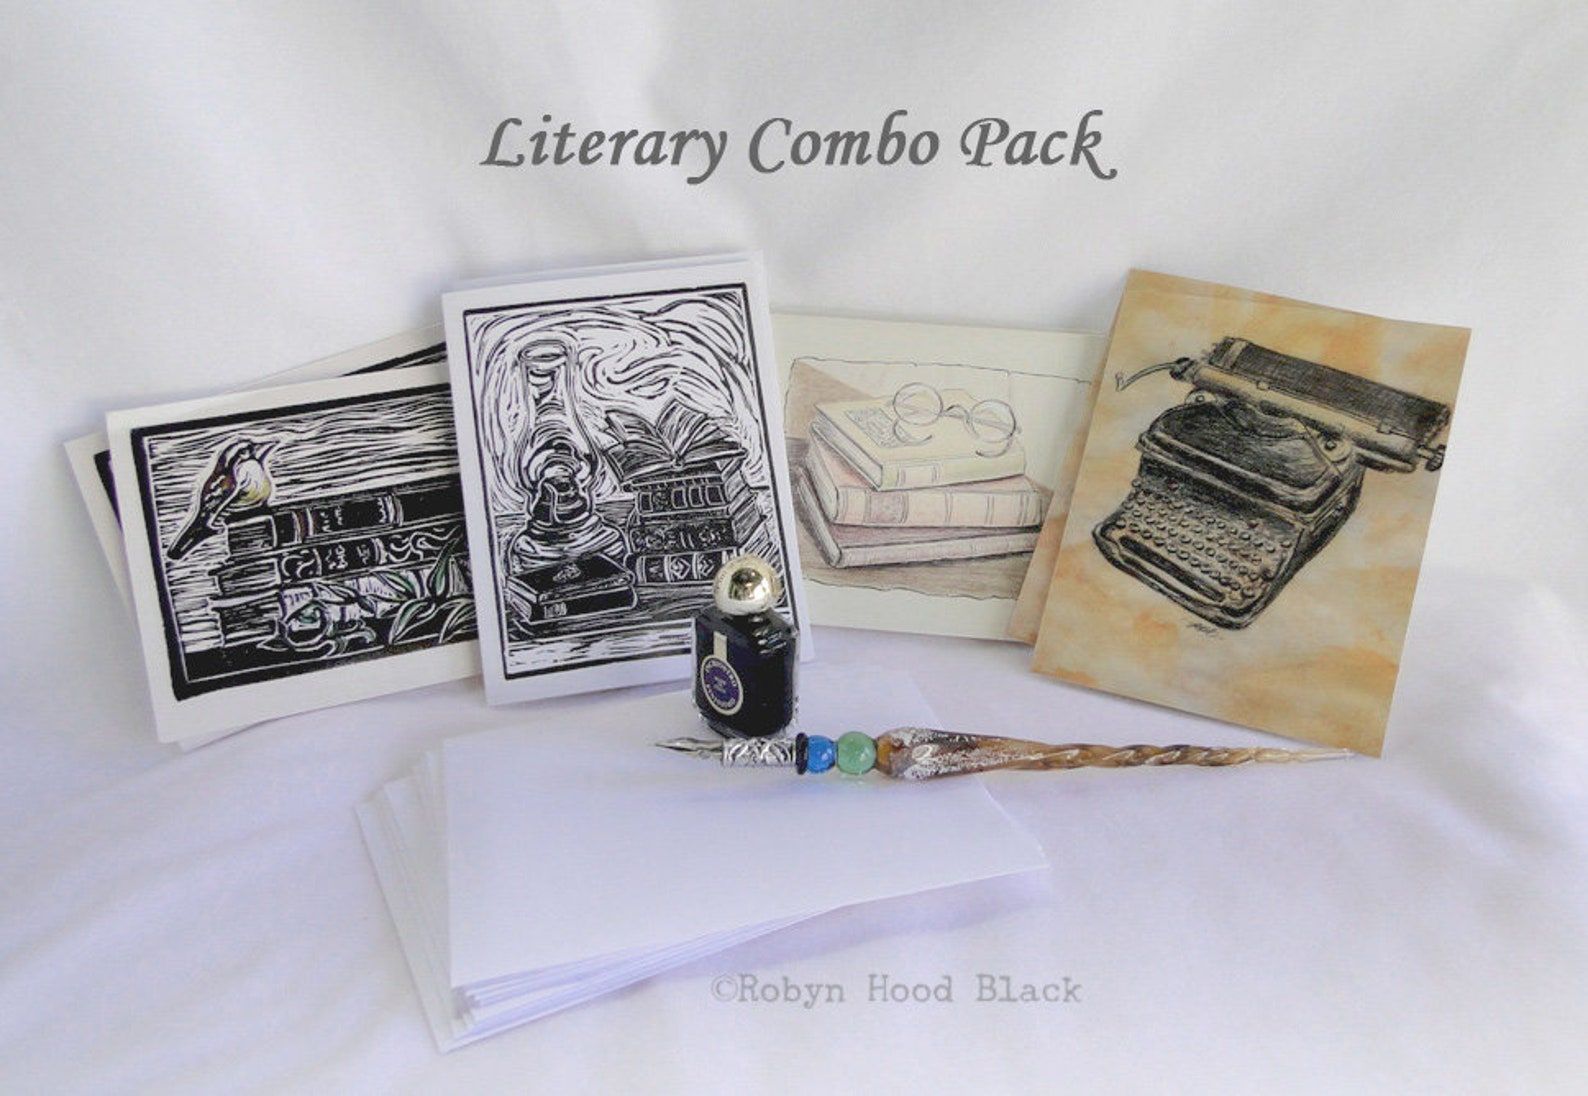 Vintage literary note cards from Etsy